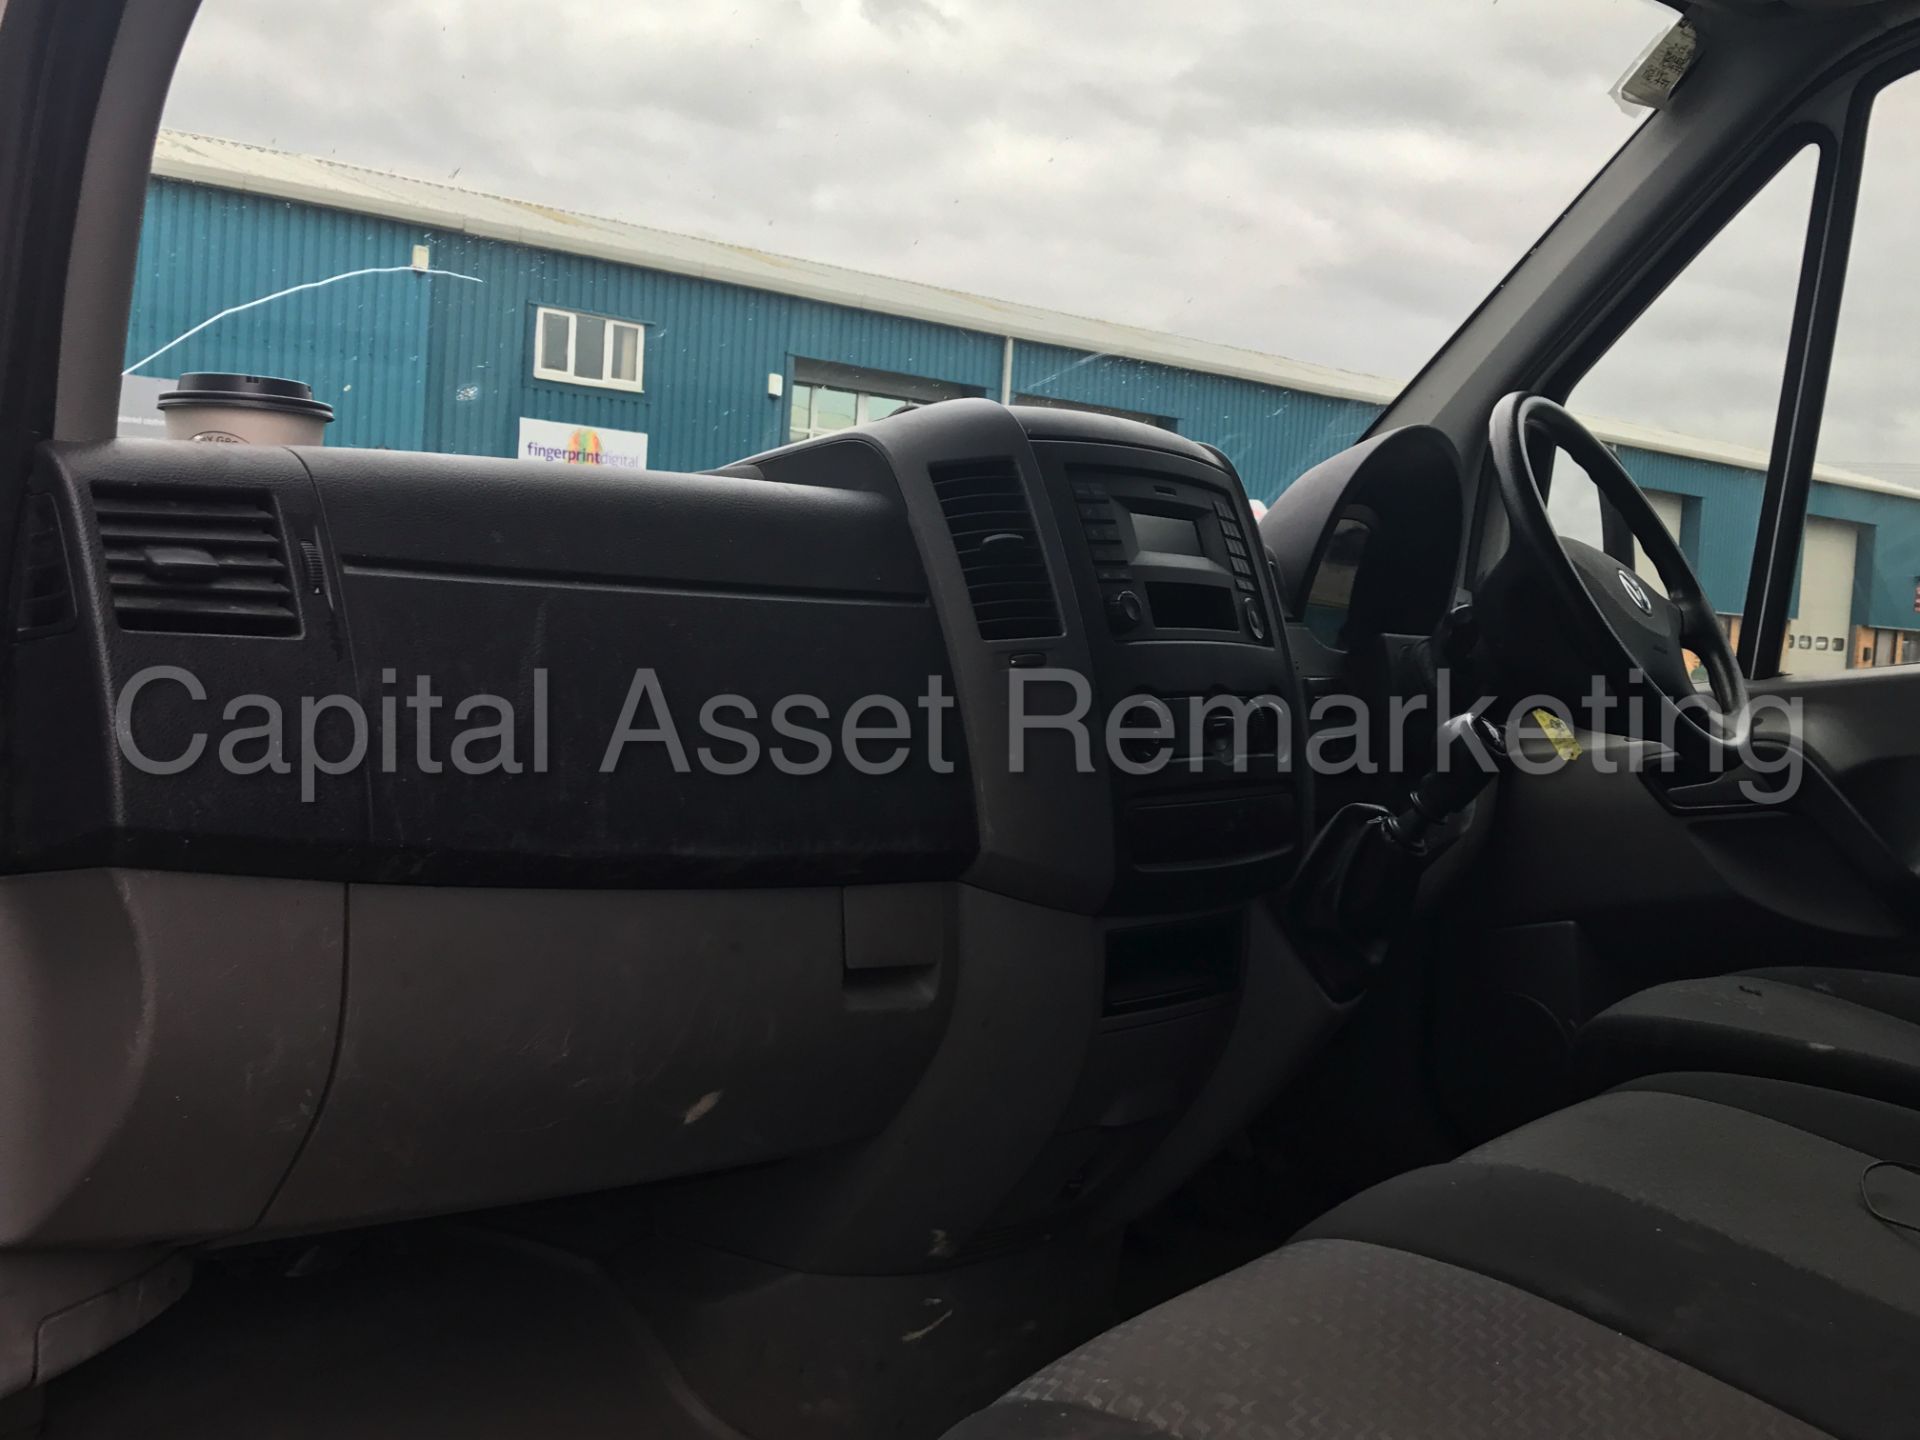 VOLKSWAGEN CRAFTER CR35 'MWB HI-ROOF' (2014) '2.0 TDI - 109 PS - 6 SPEED' *1 COMPANY OWNER FROM NEW* - Image 11 of 19